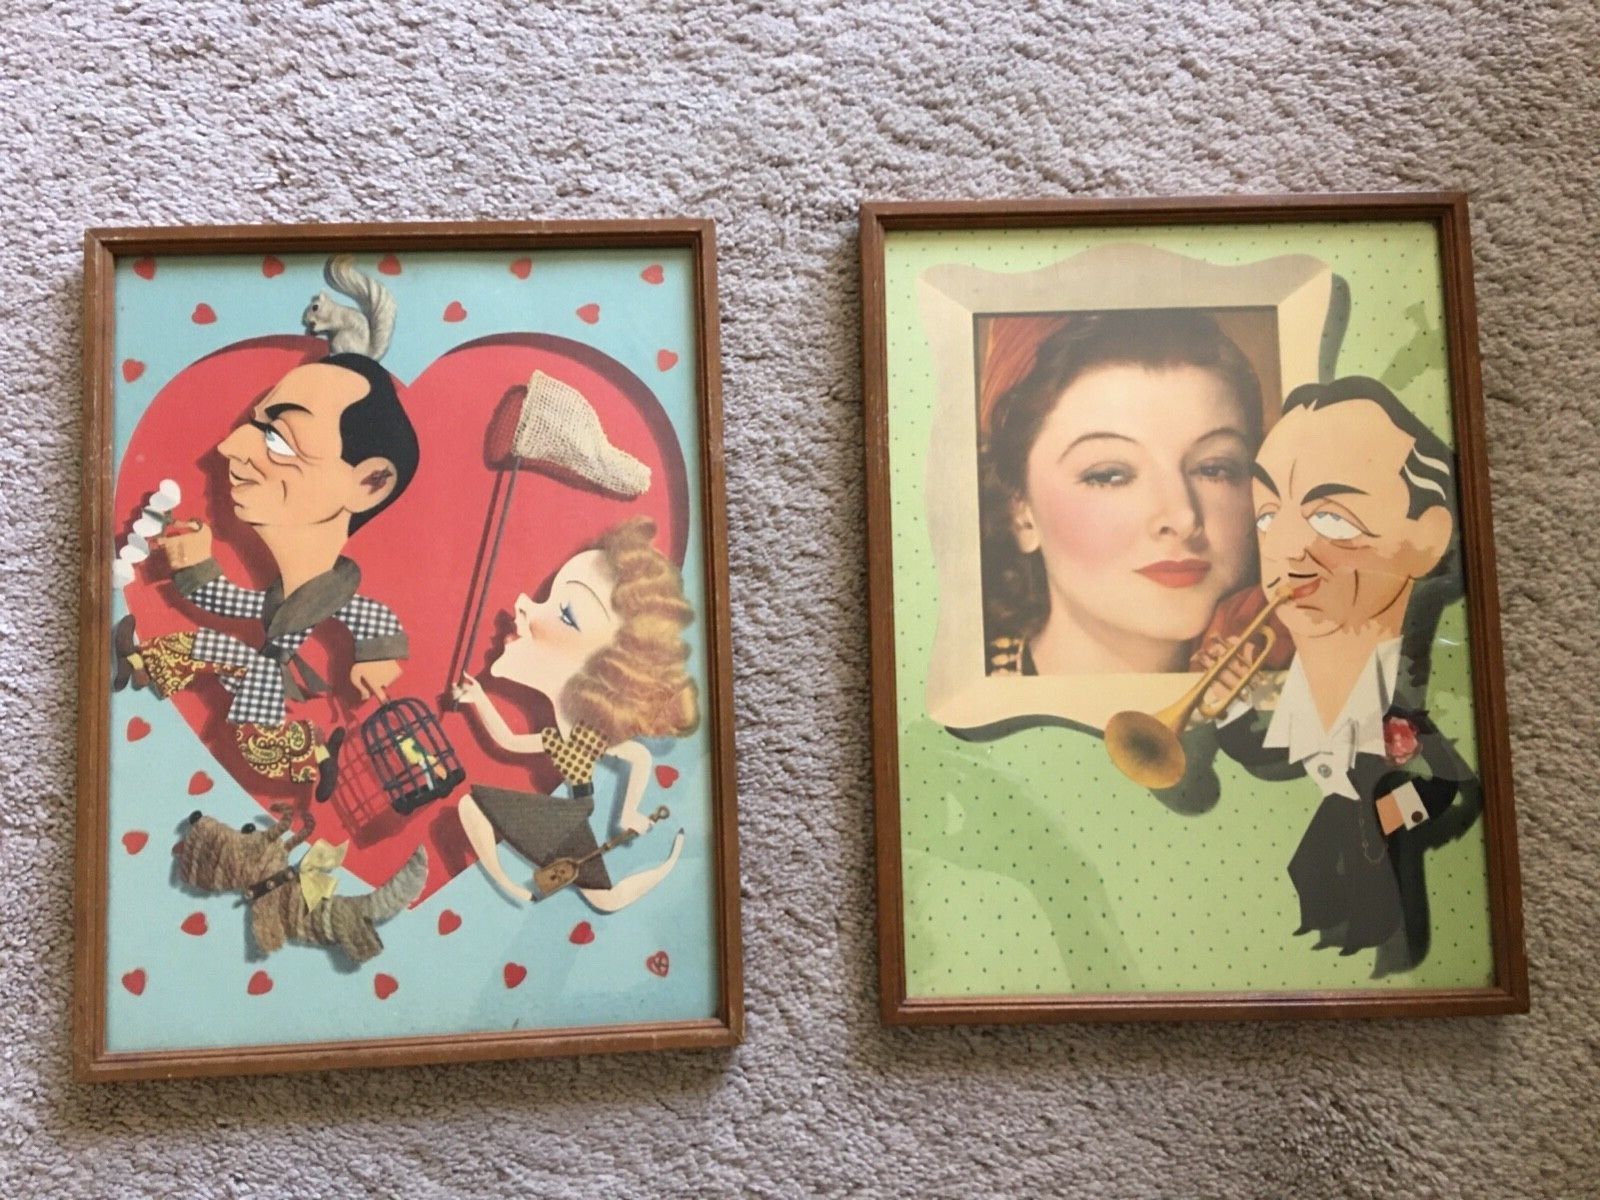 2 framed caricatures of Myrna Loy and William Powell from The Thin Man Movies